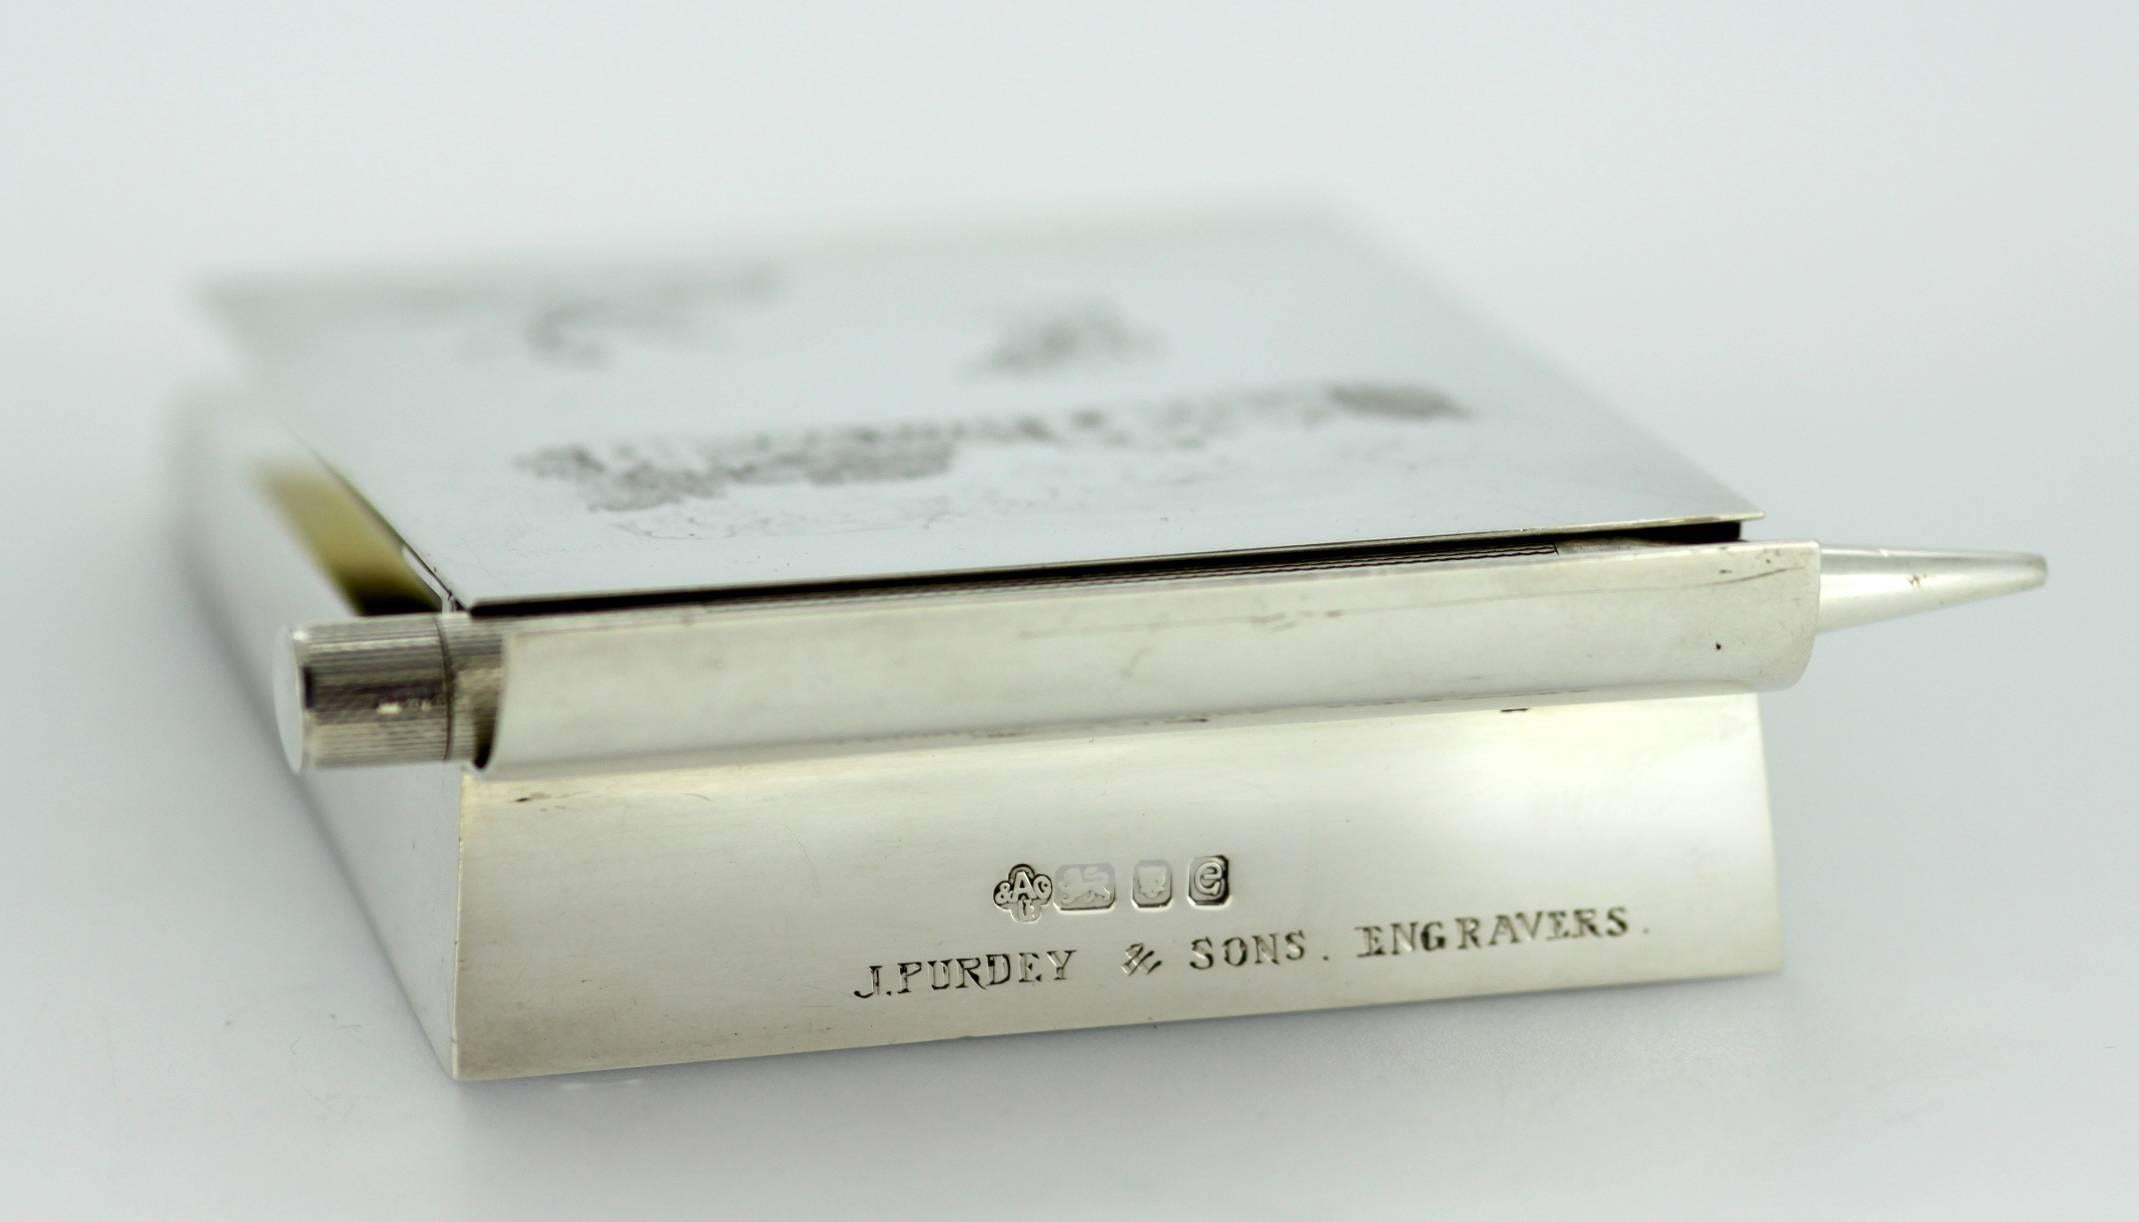 Solid silver notepad and pen, made by Asprey & Co engraved by J.Purdey & Sons (Gun Makers), London, 1960

Solid silver notepad and pen
Made in: London 1960
Maker: Asprey & Co - engraved By J.Purdey & Sons
Fully